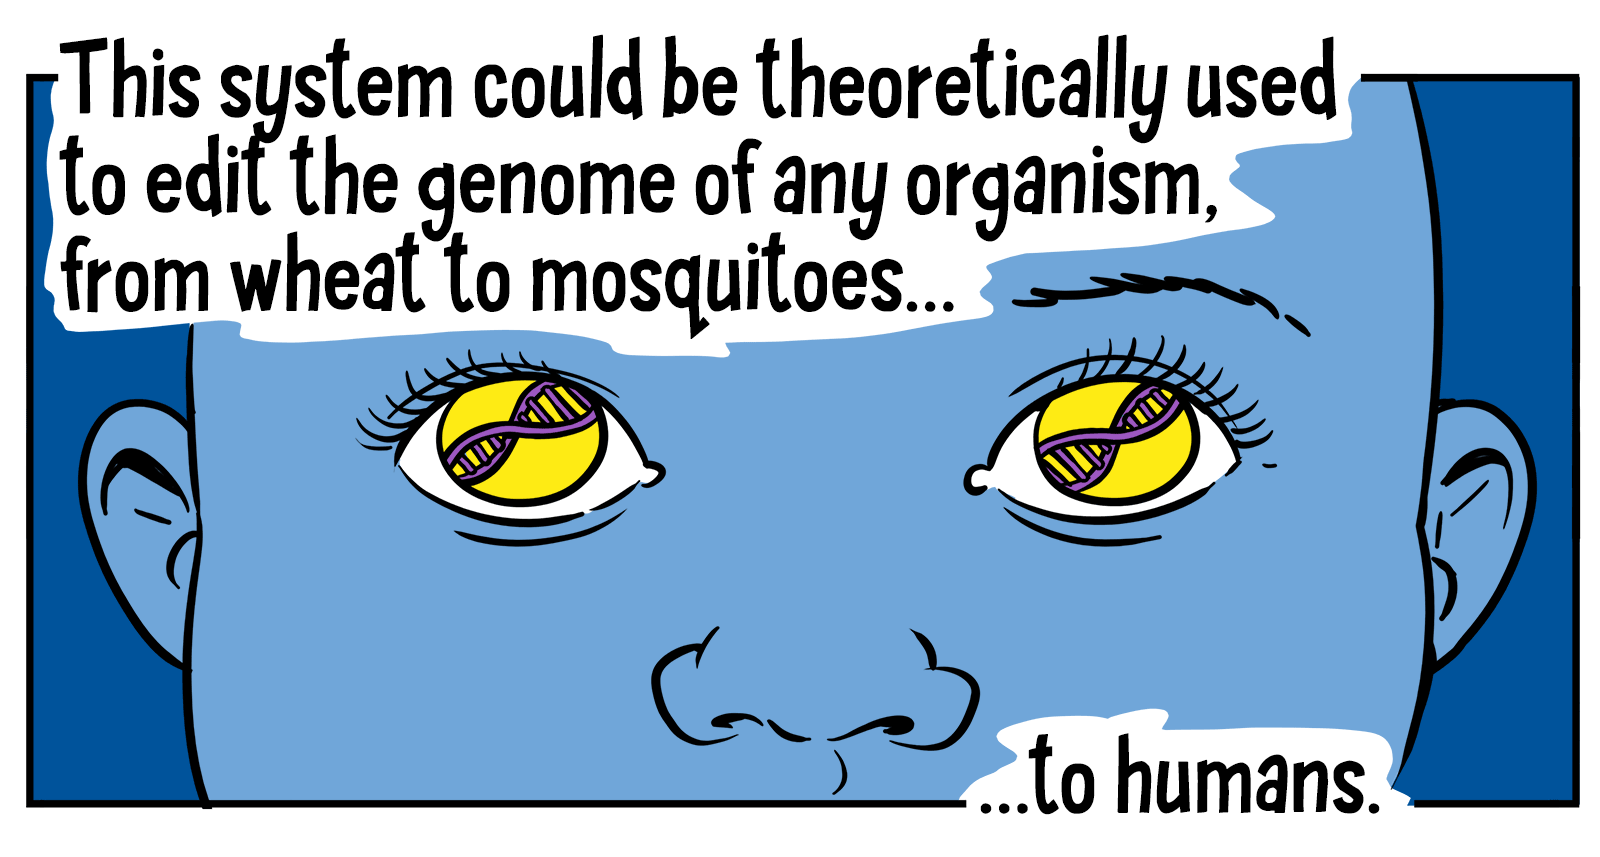 A baby's eye pupils reflect DNA strands, as if looking into future. Text reads: "This system could be theoretically used to edit the genome of any organism, from wheat to mosquitoes... to human."